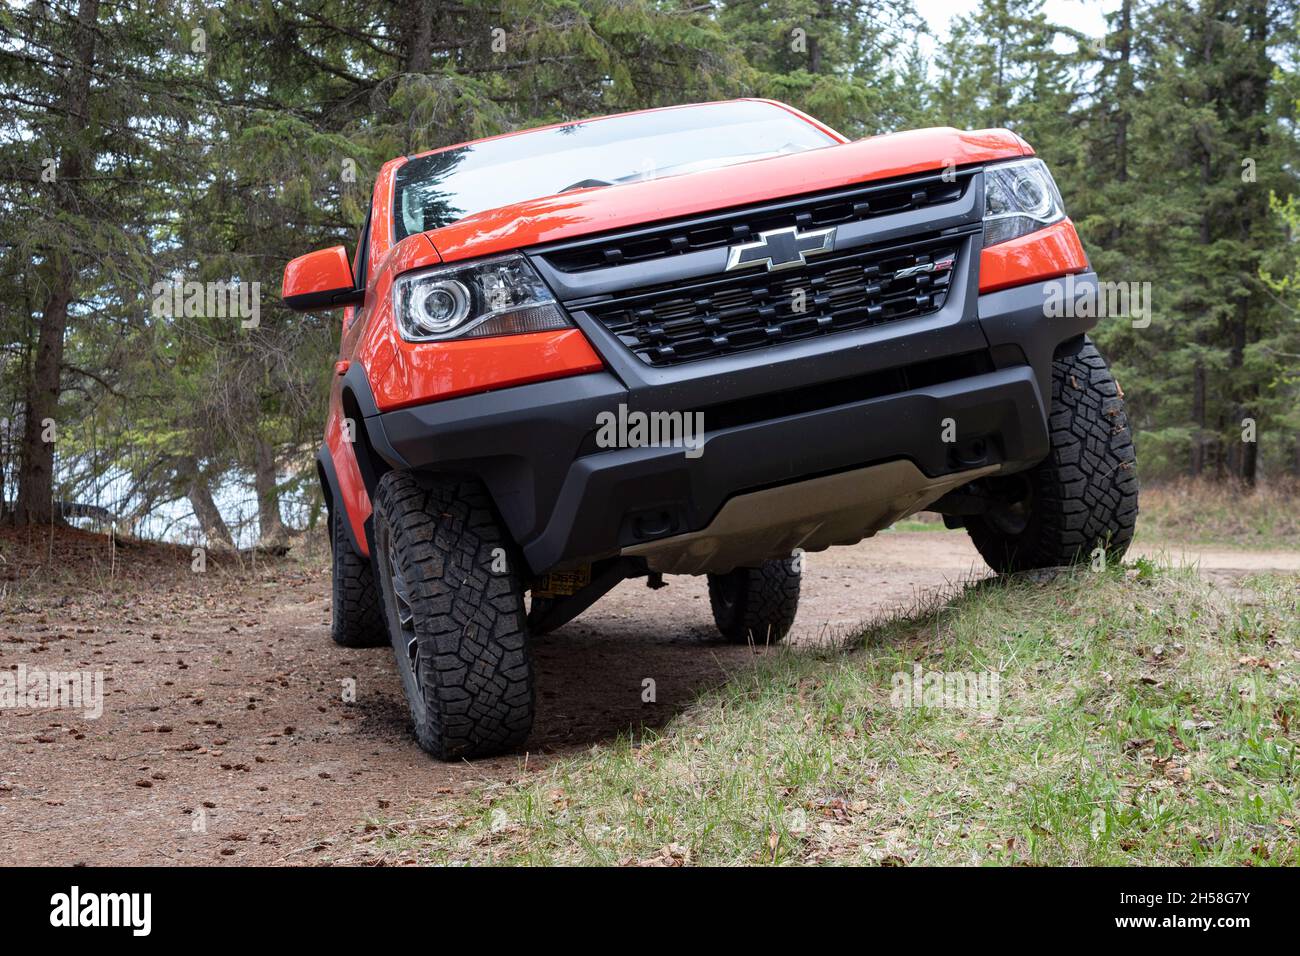 2019 Chevrolet Colorado ZR2 articulate stance on grass area in forested bush area Stock Photo